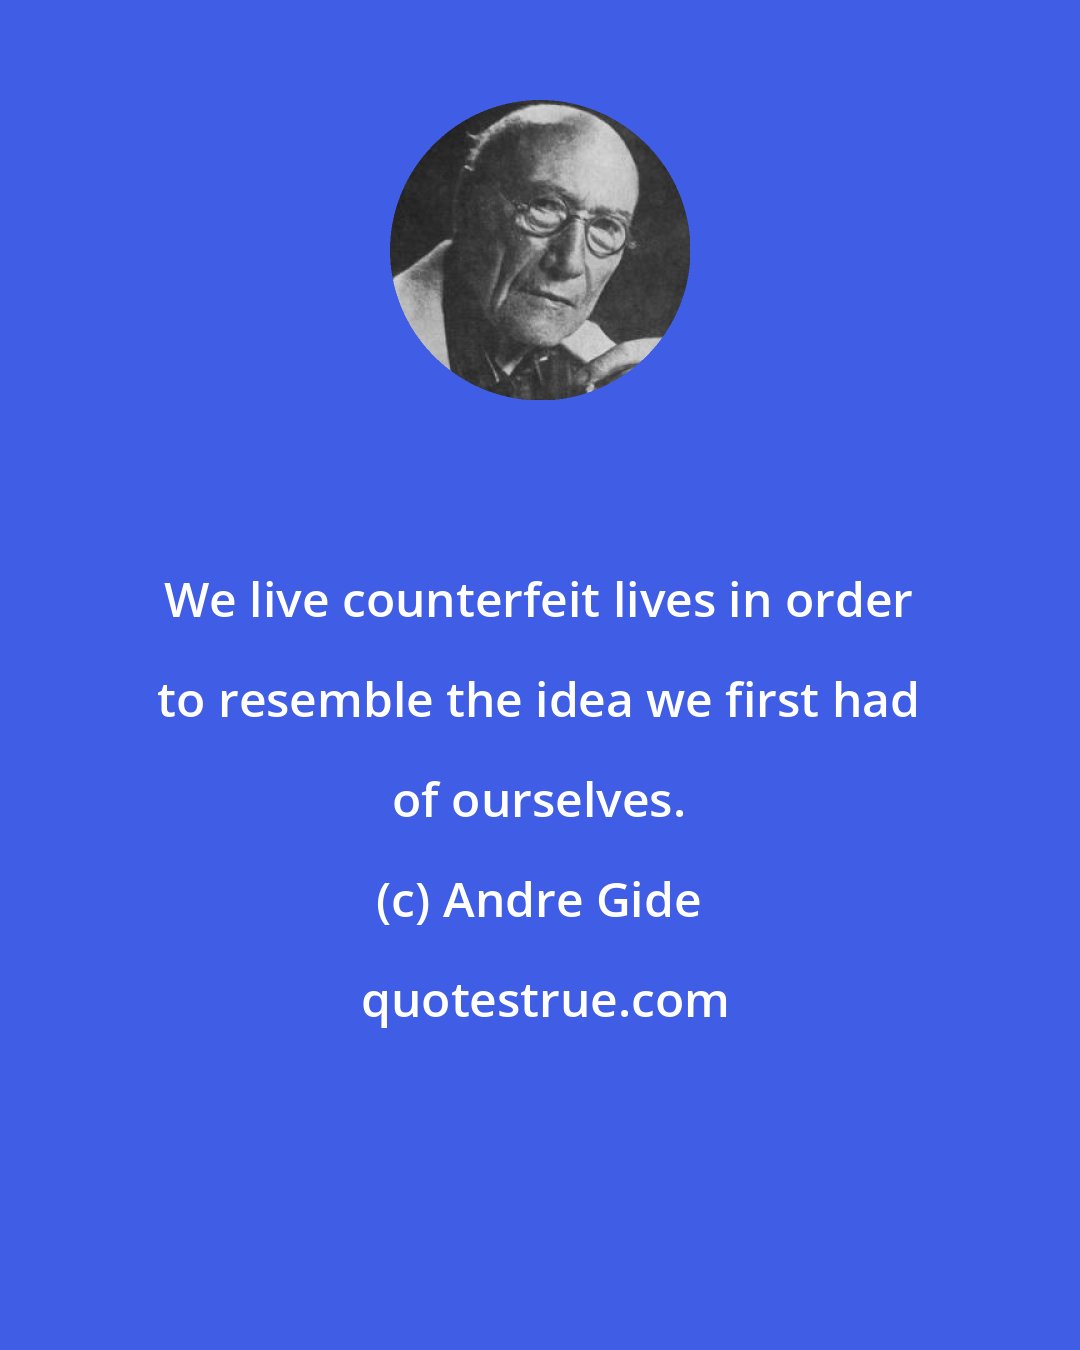 Andre Gide: We live counterfeit lives in order to resemble the idea we first had of ourselves.